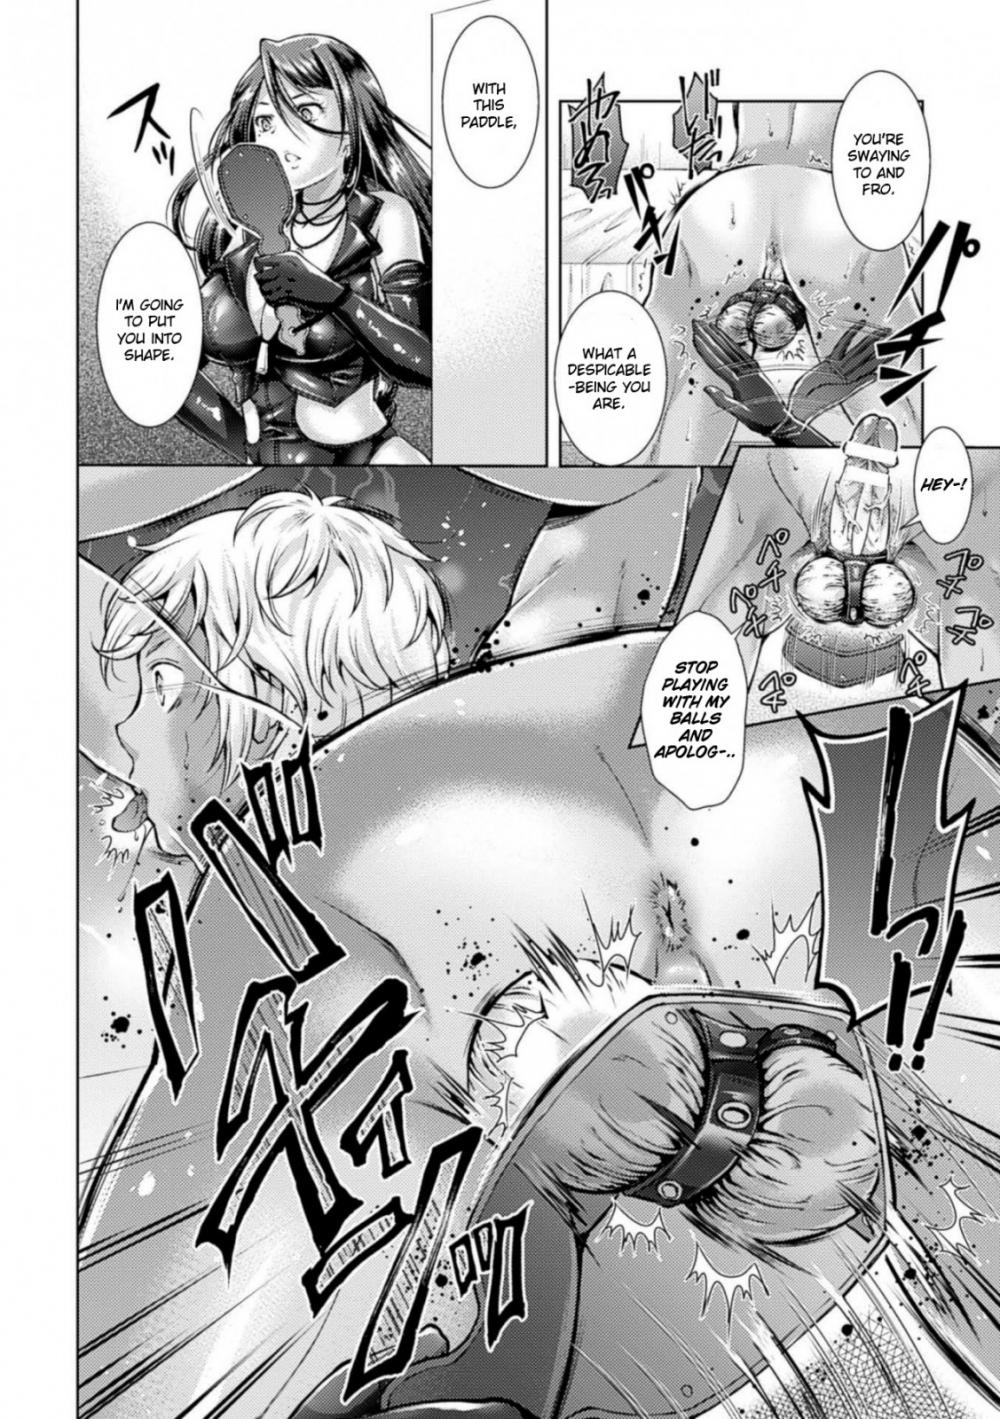 Hentai Manga Comic-Catch Ball (The Heroines Who Play With Balls Like Their Playthings And Use Ejaculation Control Vol. 1)-Read-11